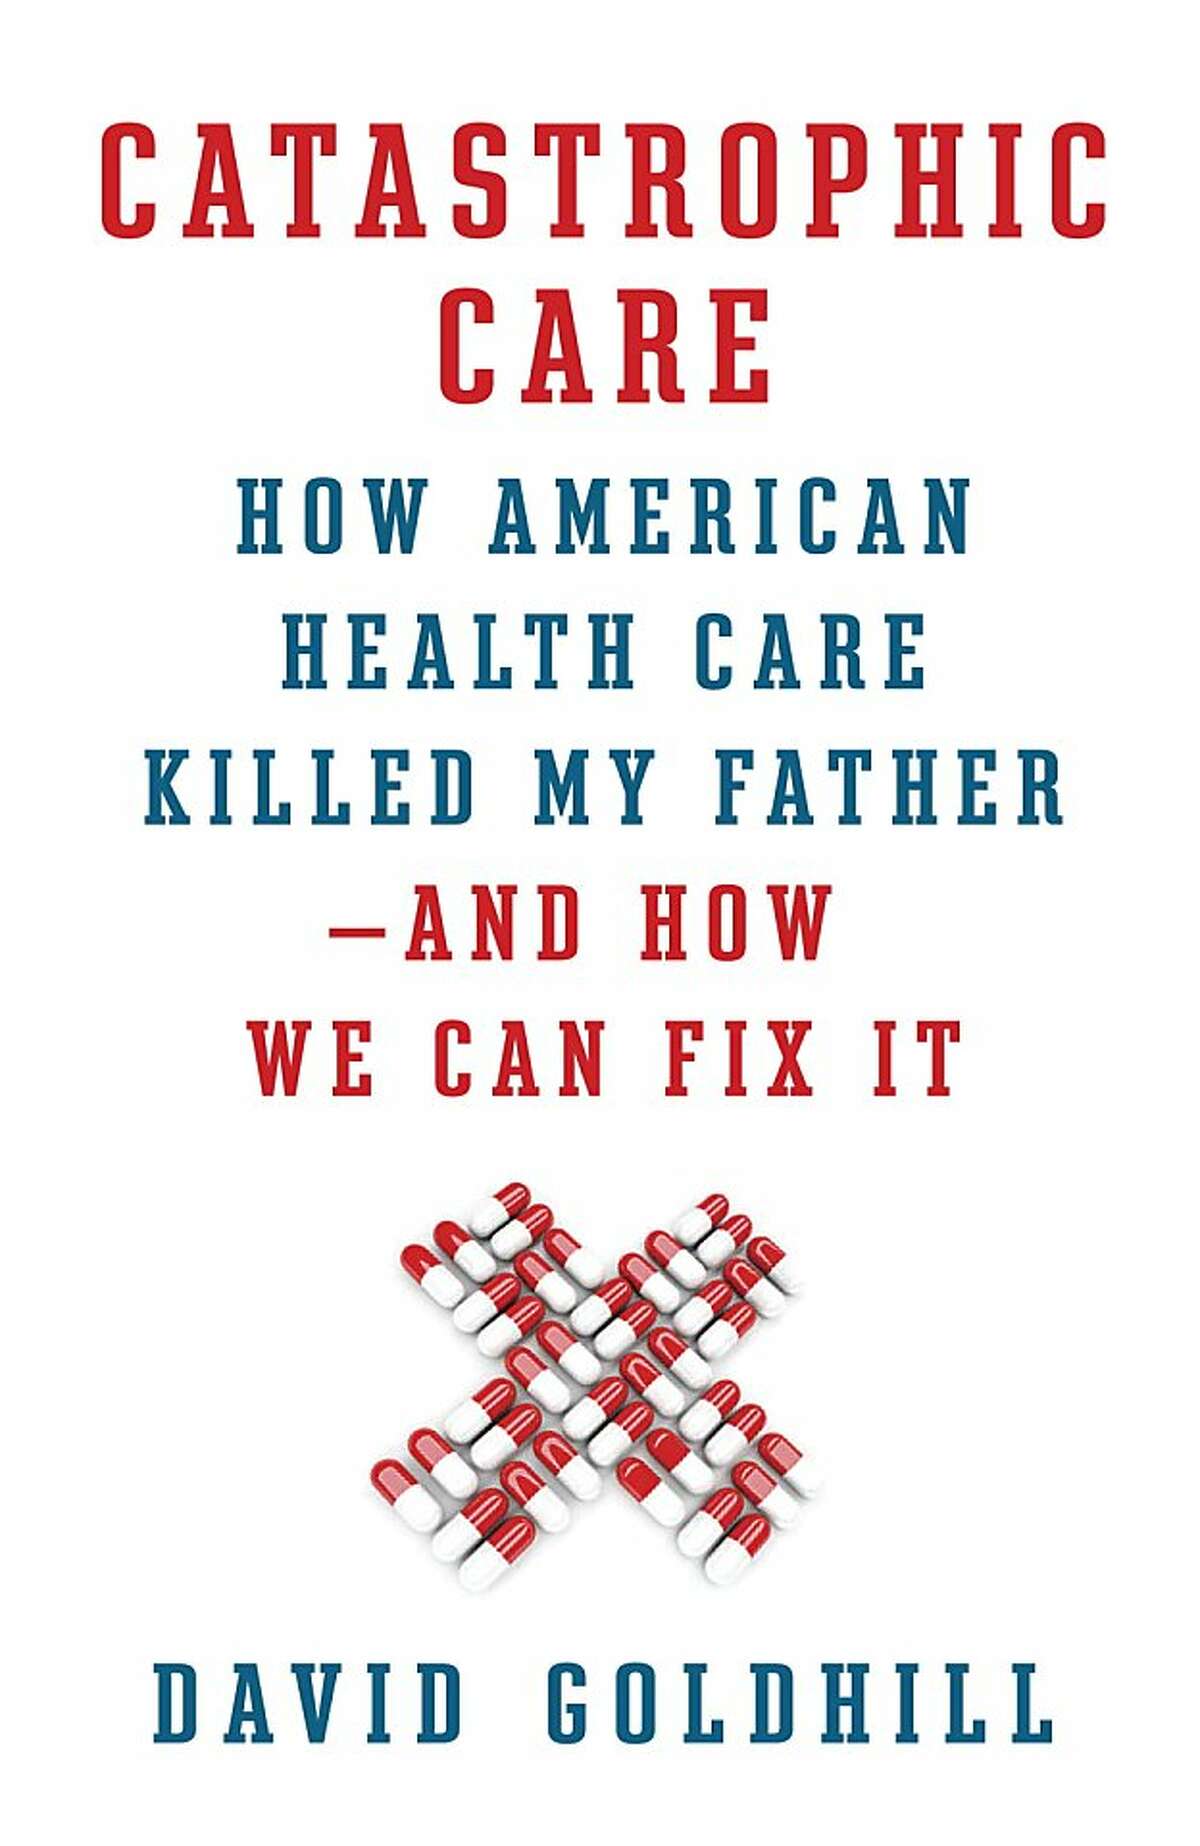 Catastrophic Care, by David Goldhill